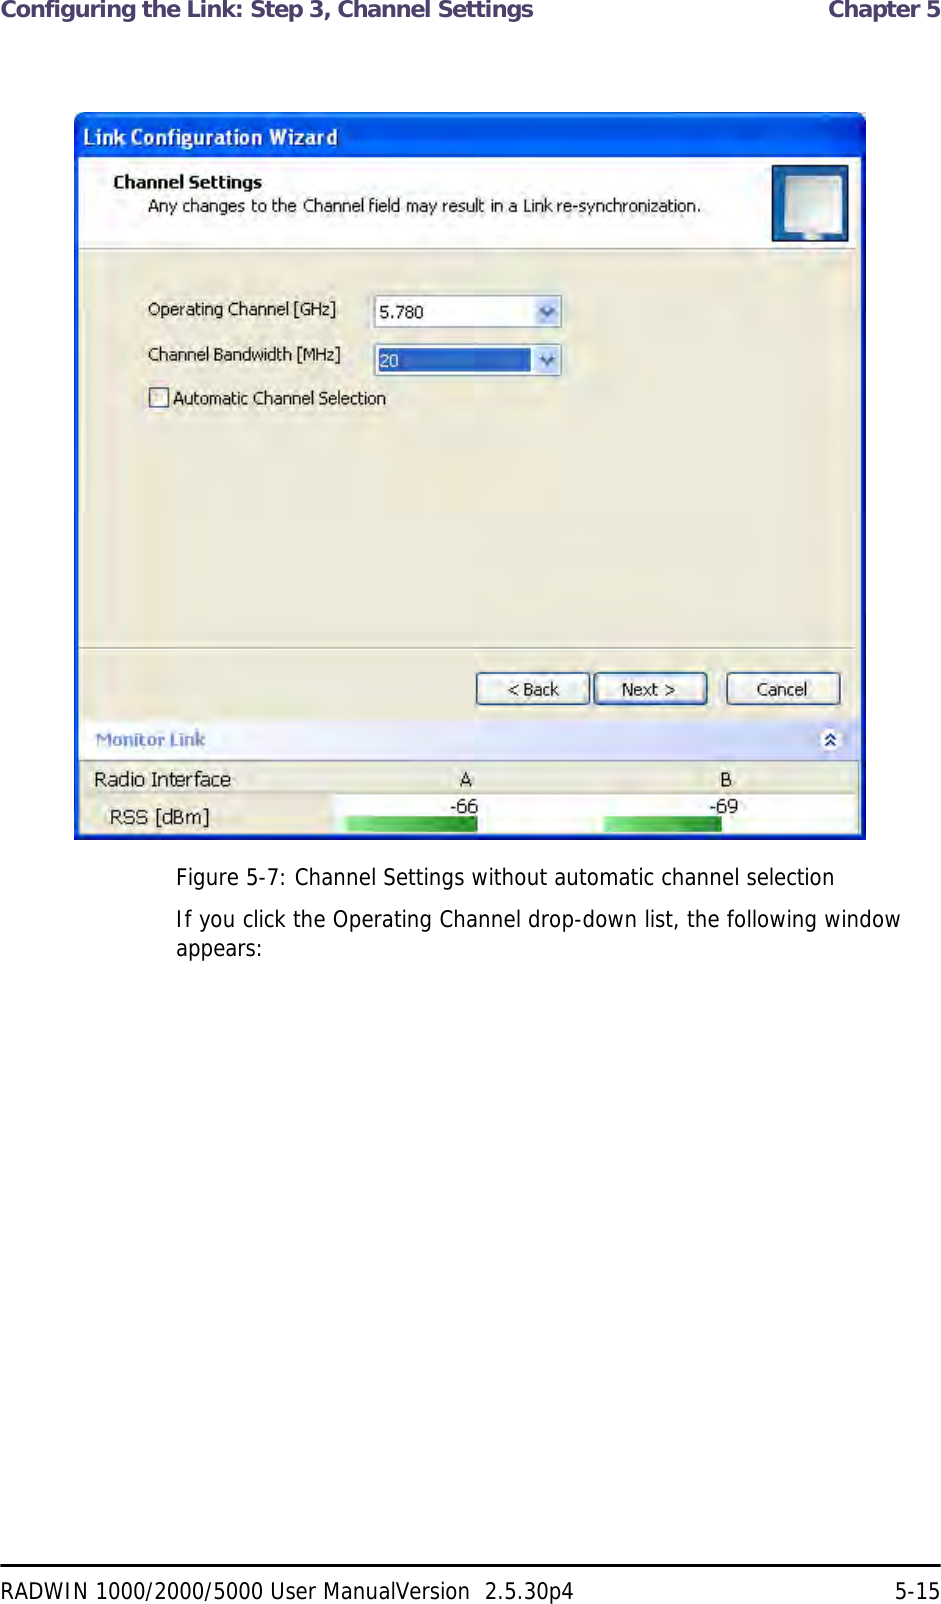 Configuring the Link: Step 3, Channel Settings  Chapter 5RADWIN 1000/2000/5000 User ManualVersion  2.5.30p4 5-15Figure 5-7: Channel Settings without automatic channel selectionIf you click the Operating Channel drop-down list, the following window appears: